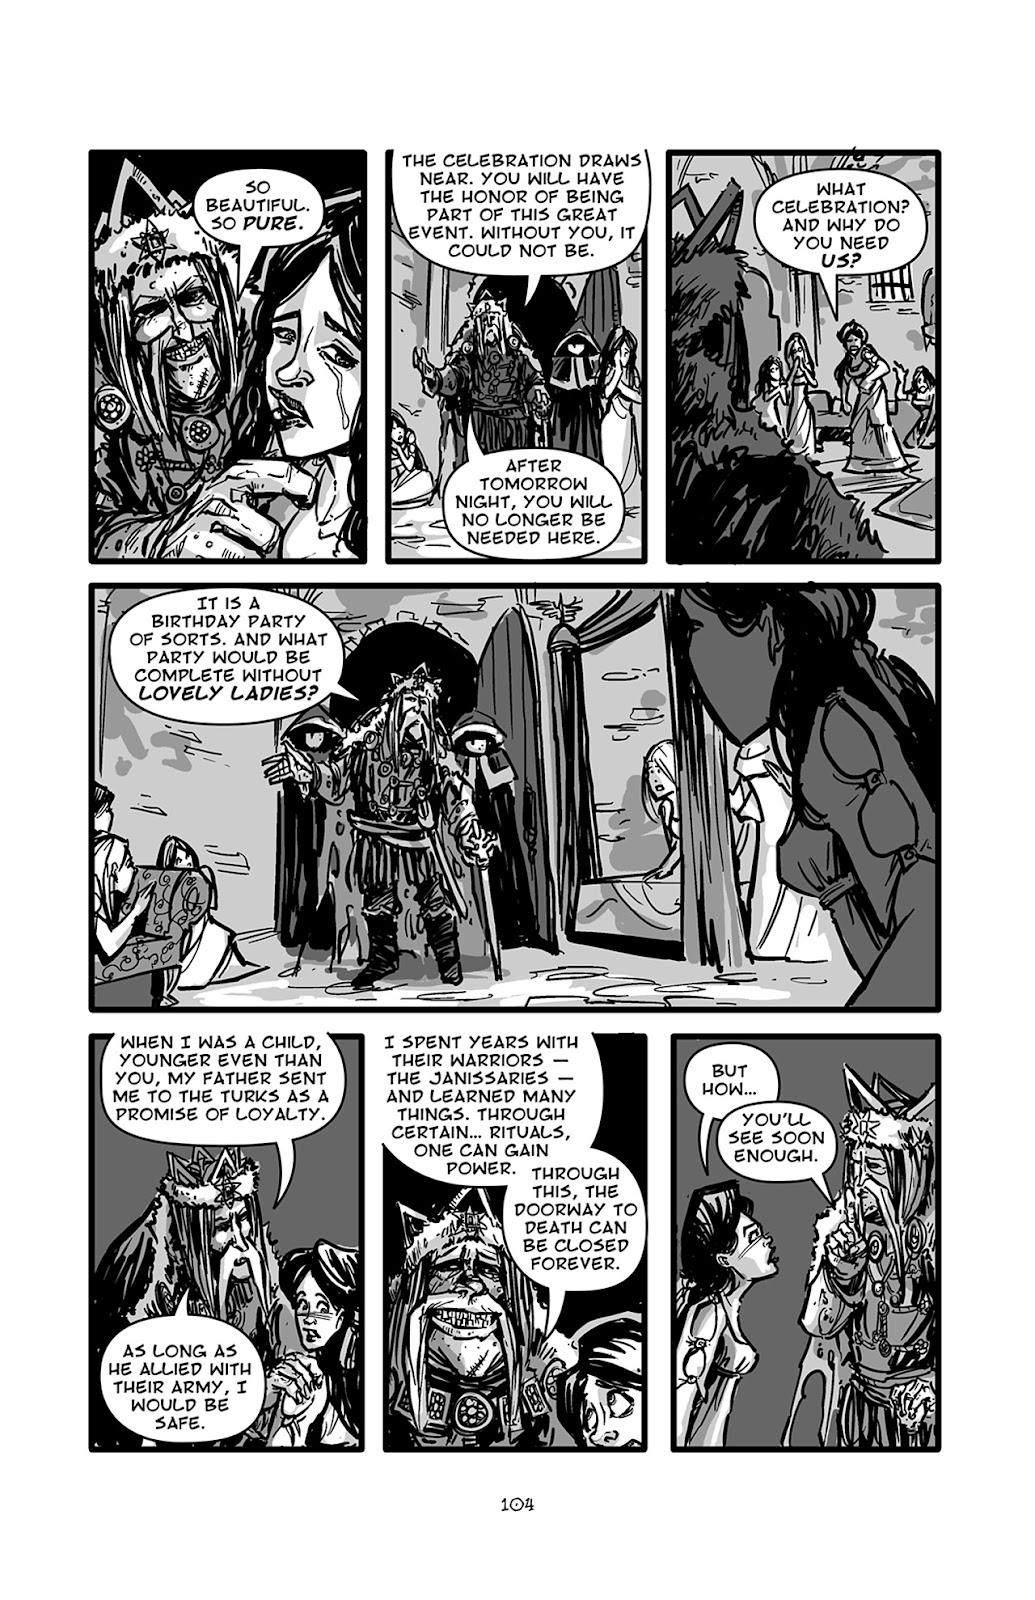 Pinocchio: Vampire Slayer - Of Wood and Blood issue 5 - Page 5